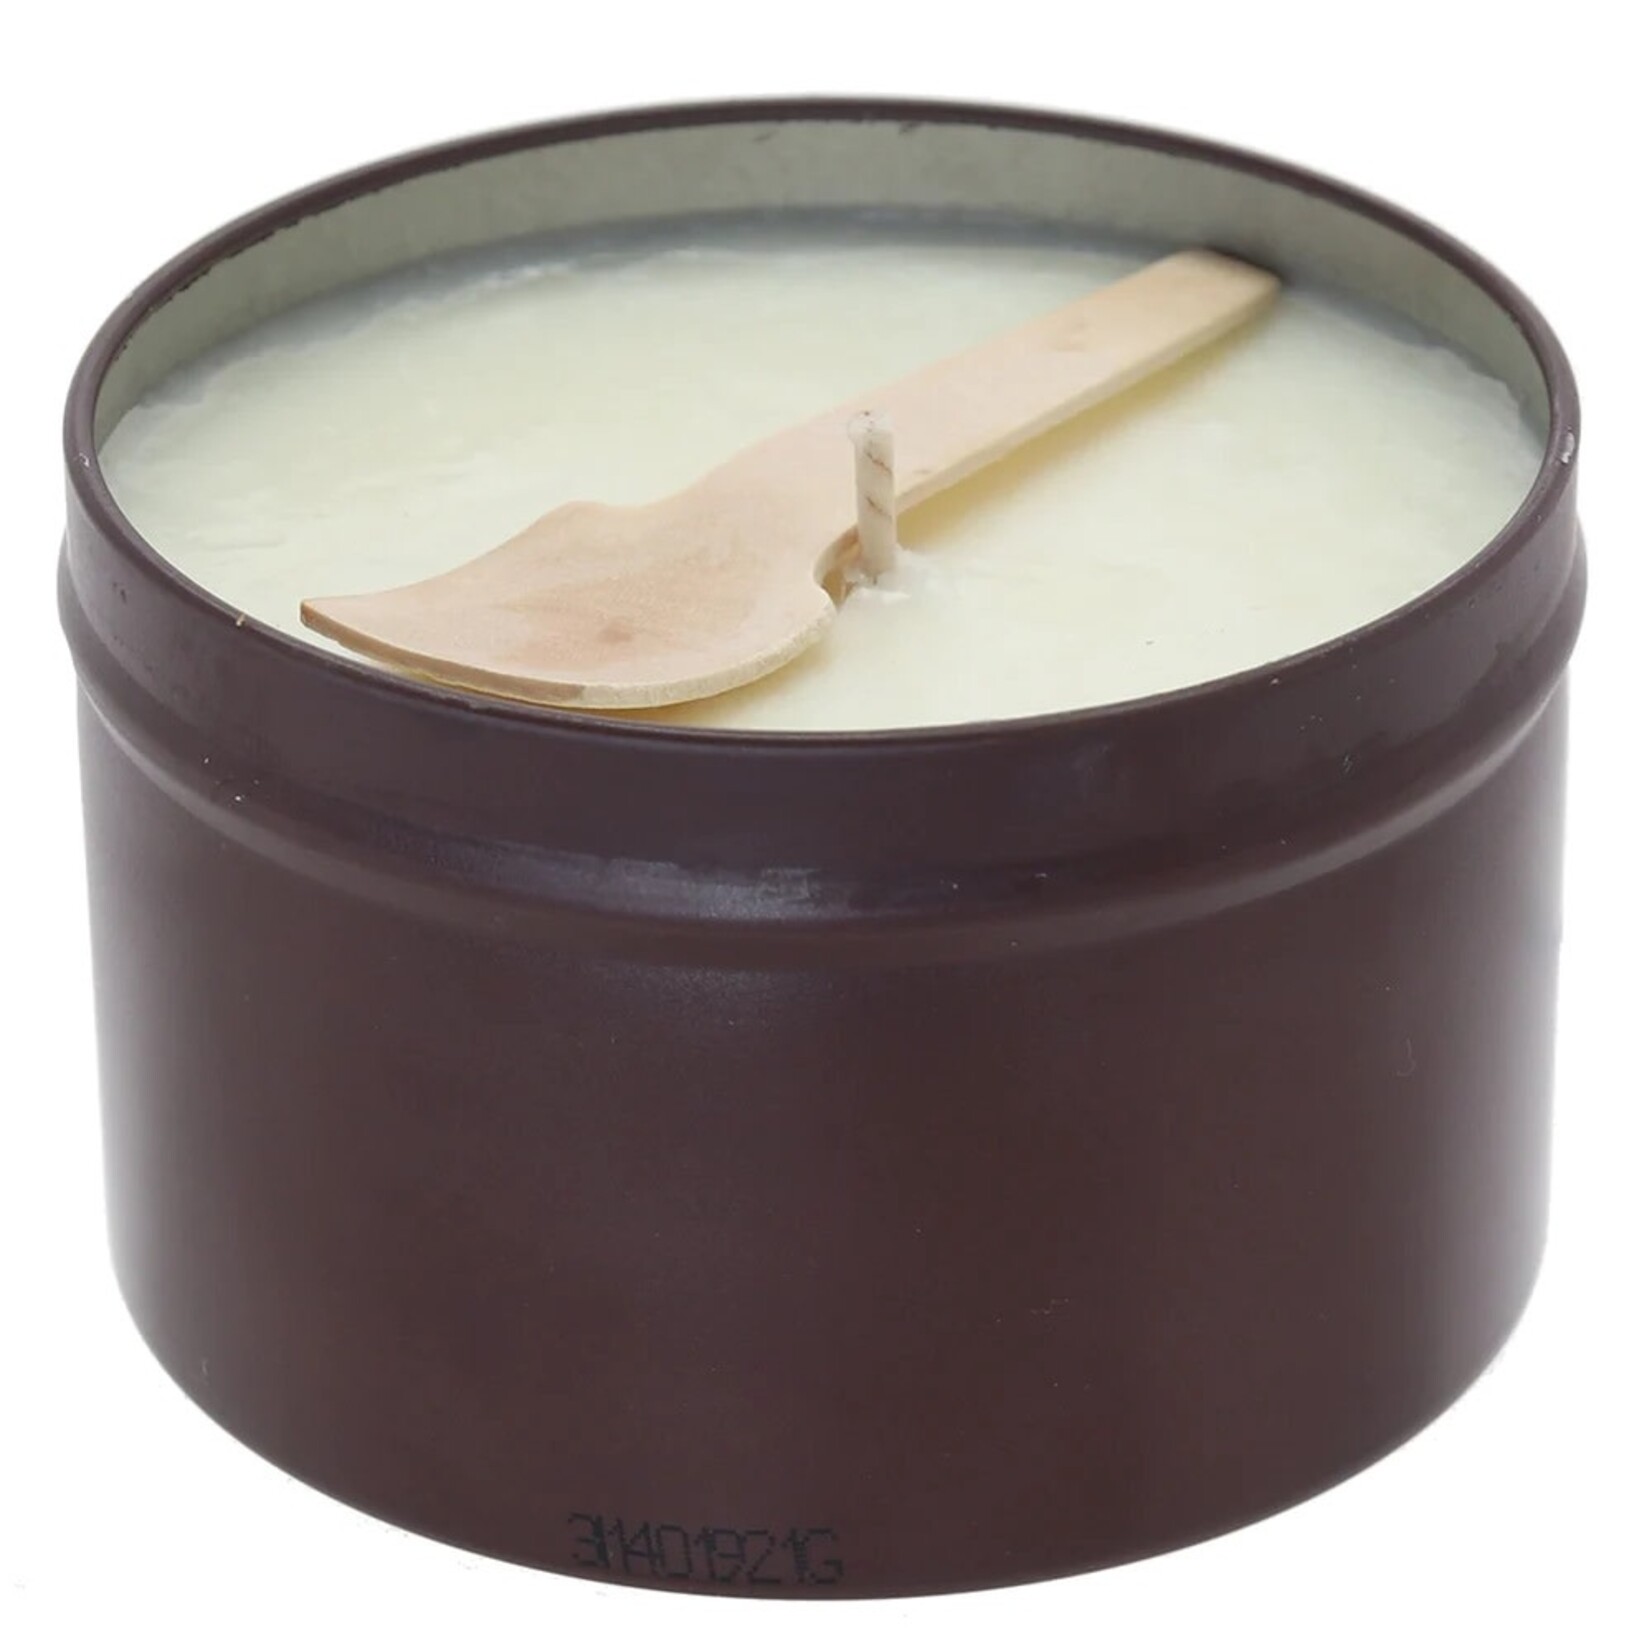 EARTHLY BODY EARTHLY BODY - 3-IN-1 MASSAGE CANDLE 6OZ IN CAN'T GET YOU OUT OF MY SLED CAN'T GET YOU OUT OF MY SLED